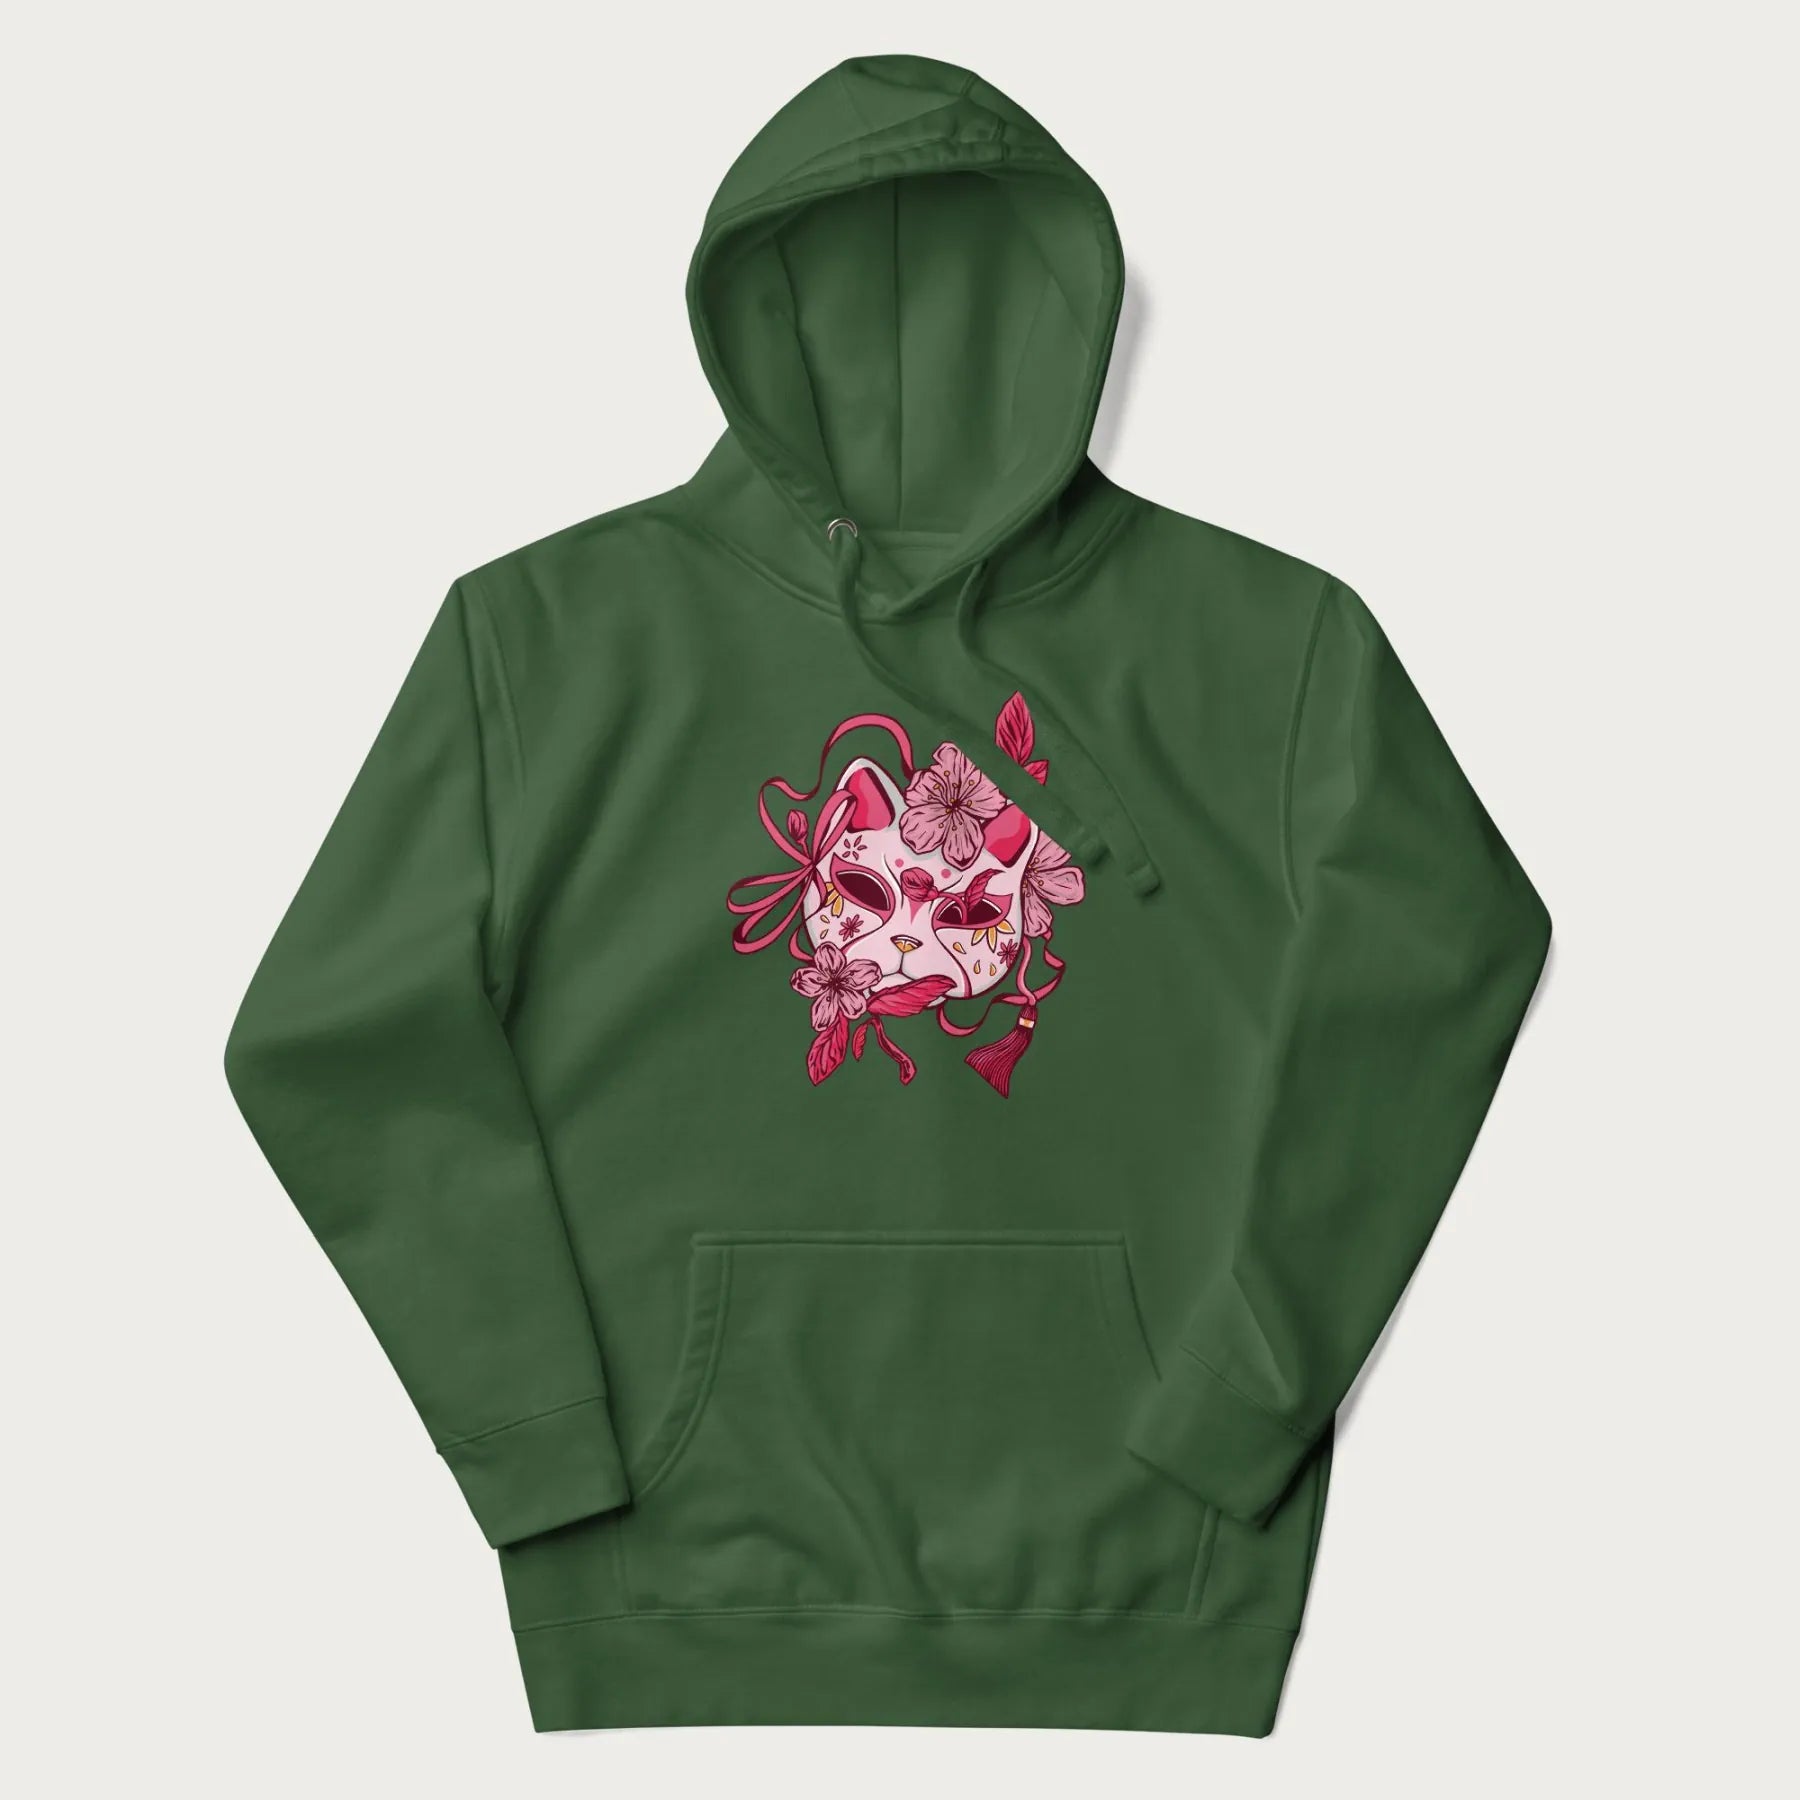 Green hoodie with a Japanese kitsune mask and sakura design on the front.